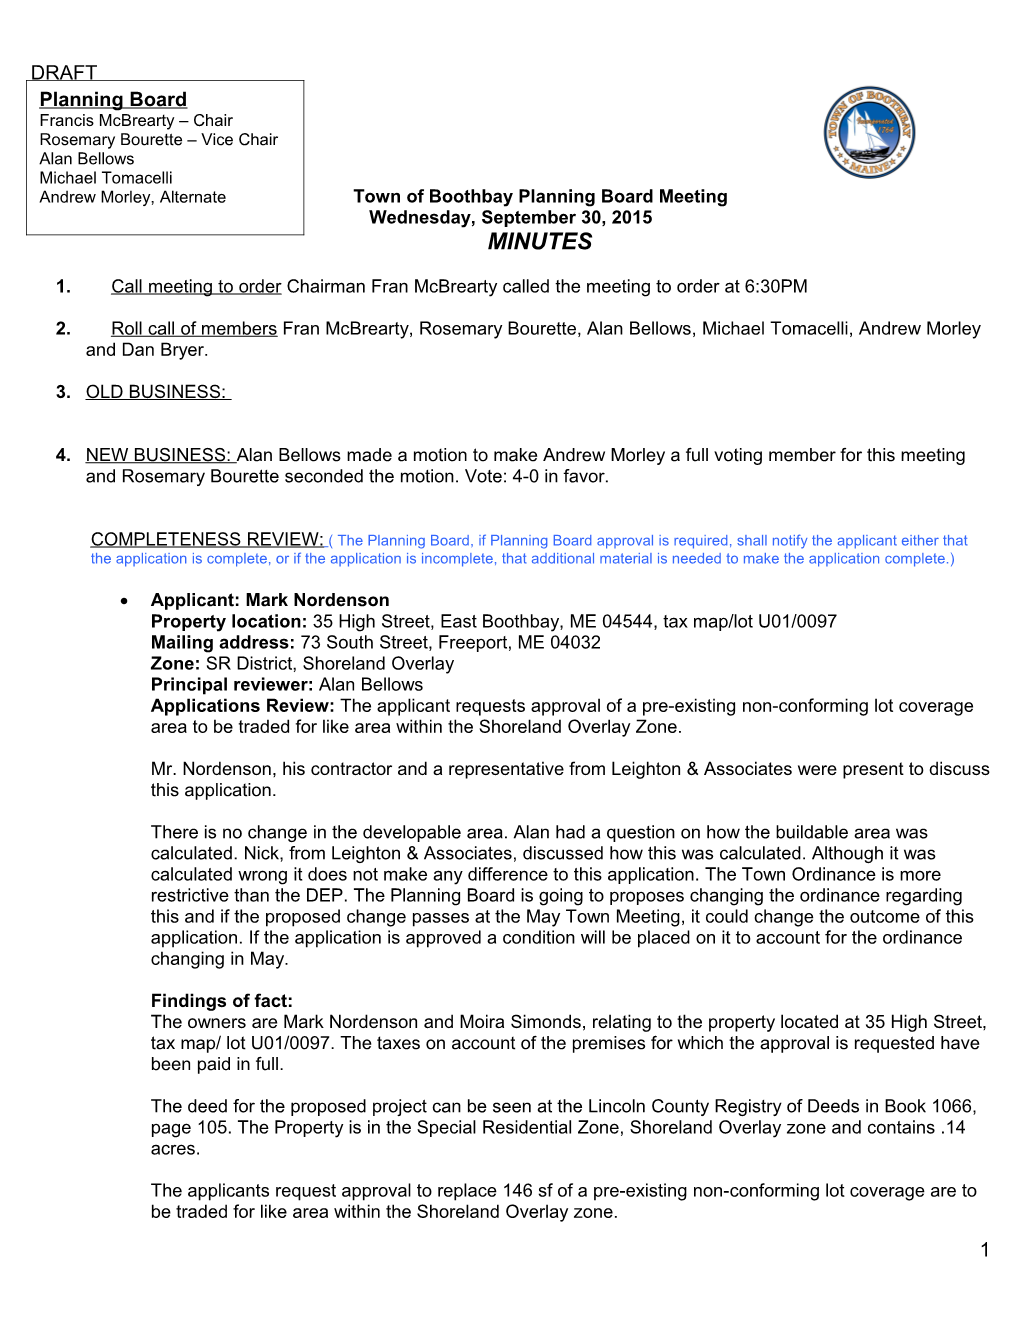 Town of Boothbay Planning Boardmeeting